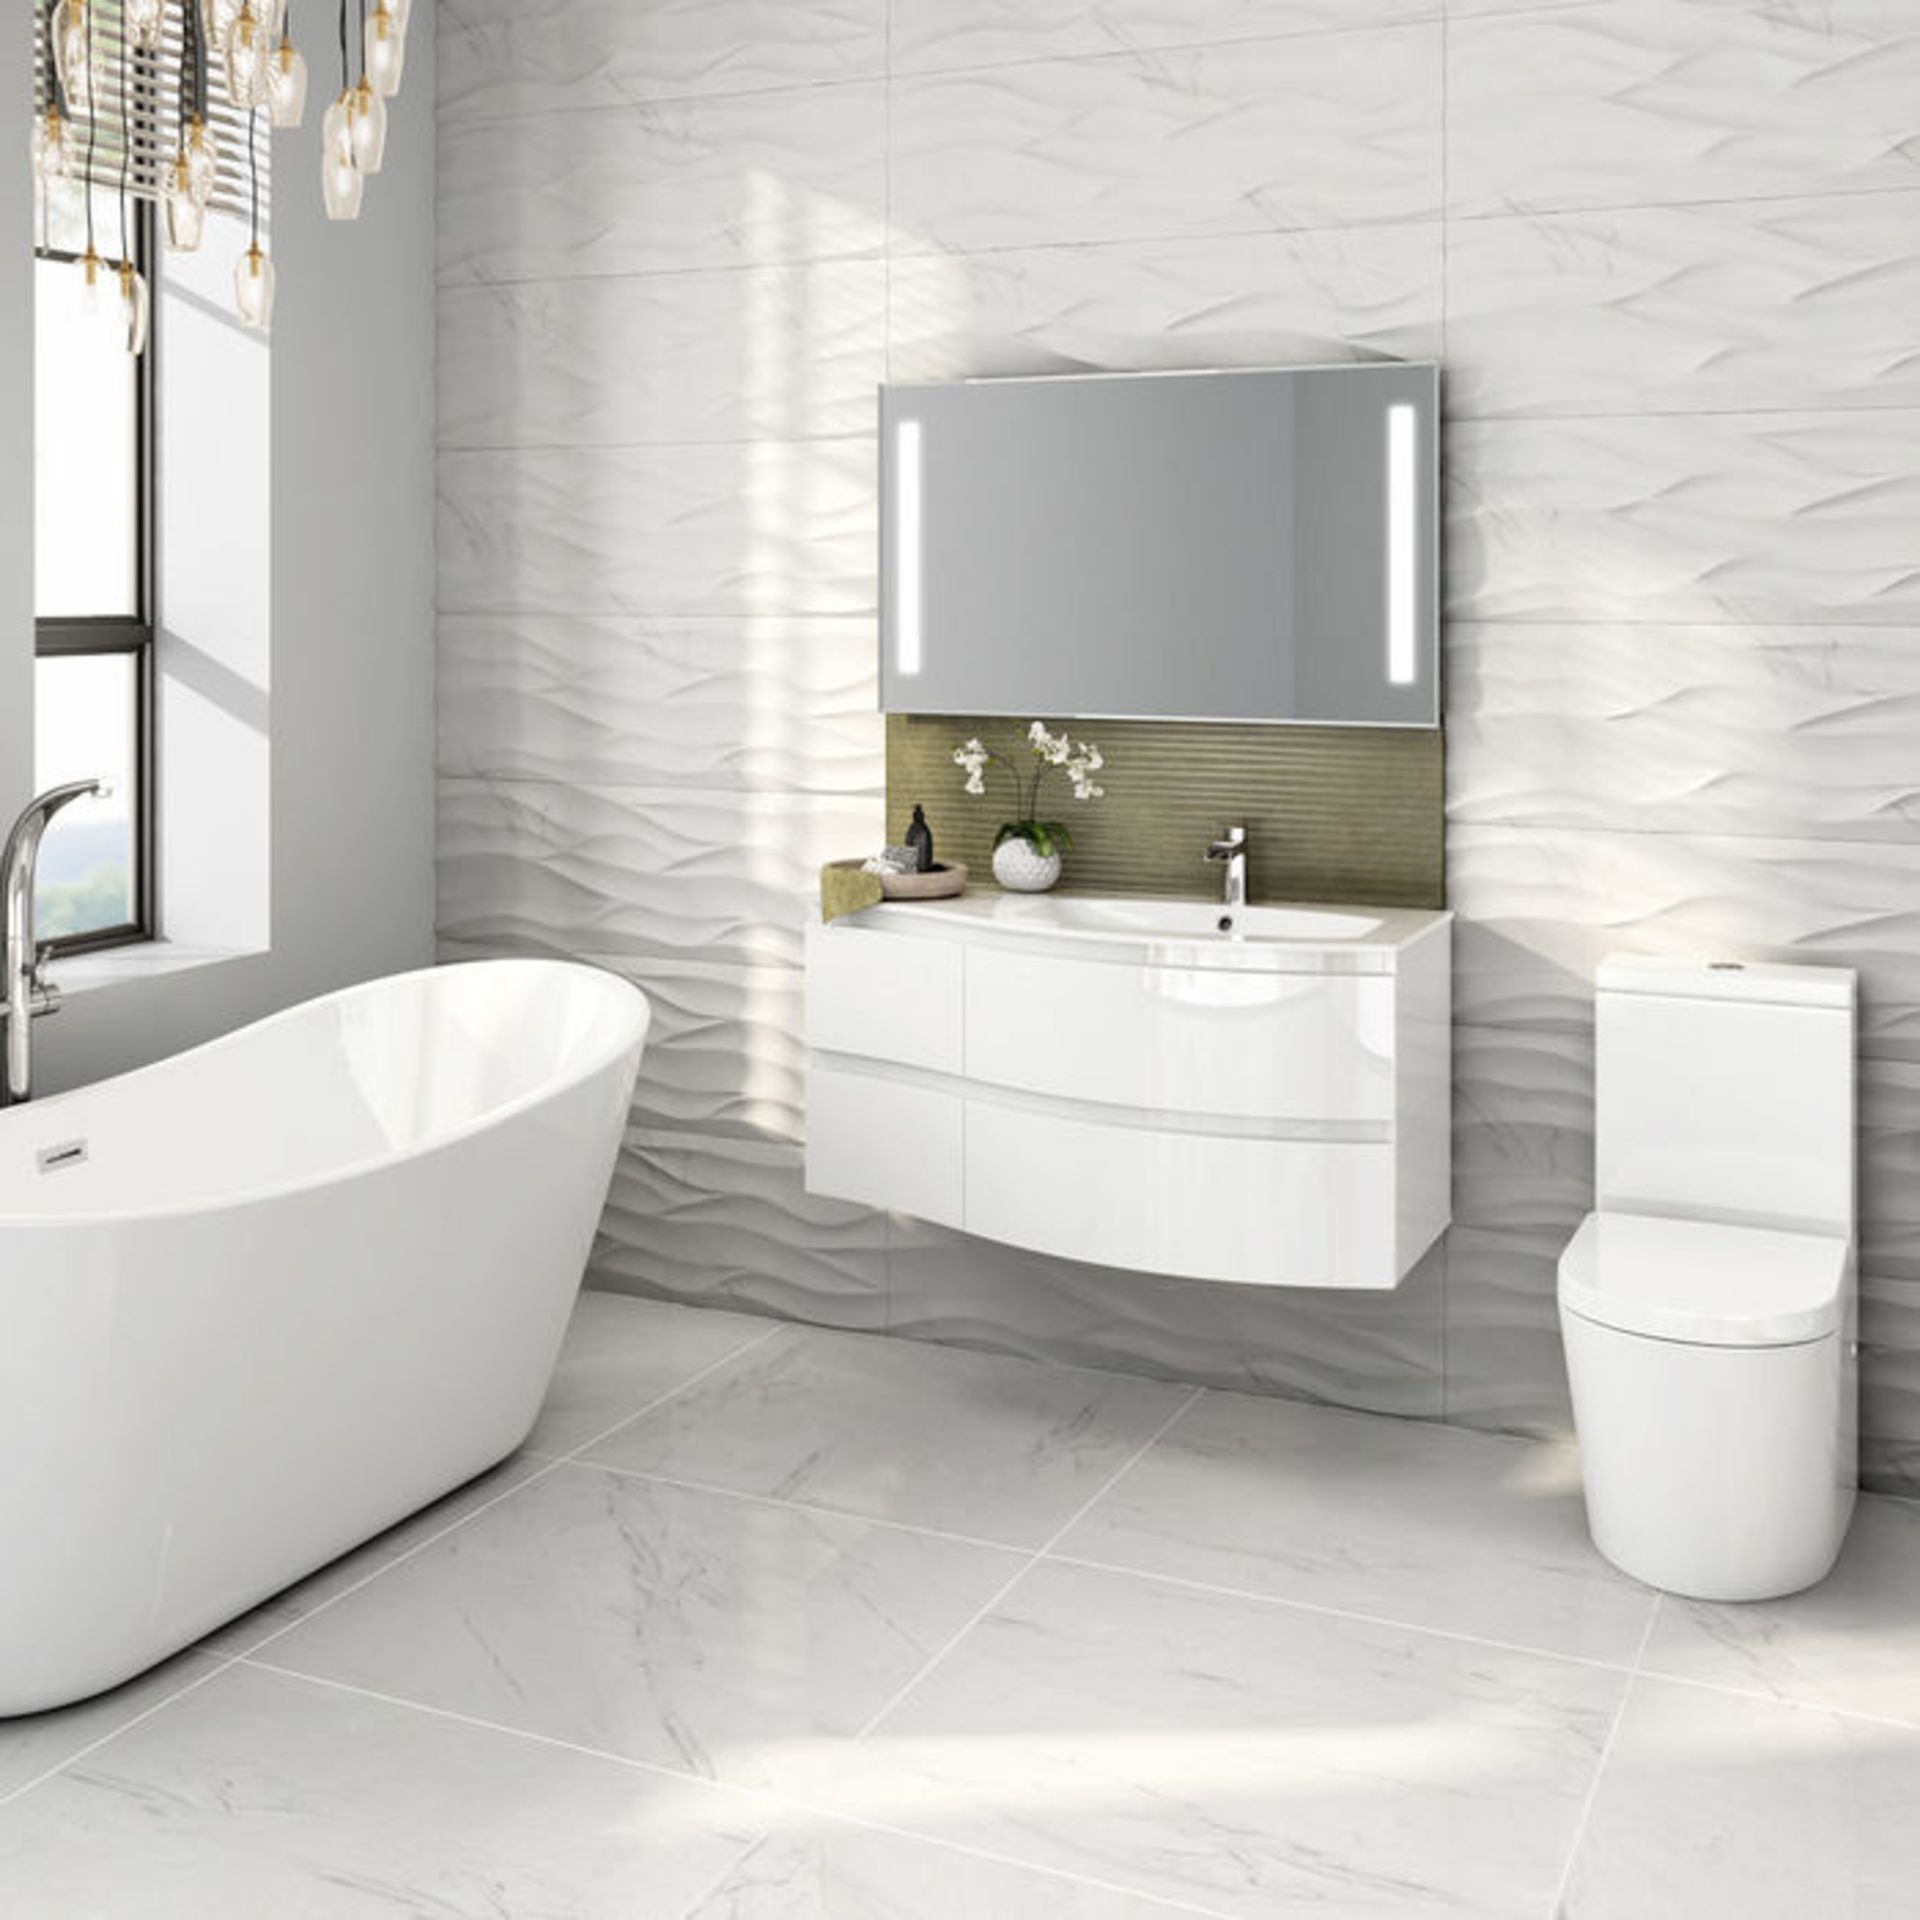 BRAND NEW 1040mm Amelie High Gloss White Curved Vanity Unit - Right Hand - Wall Hung. RRP £1,499. - Image 2 of 5